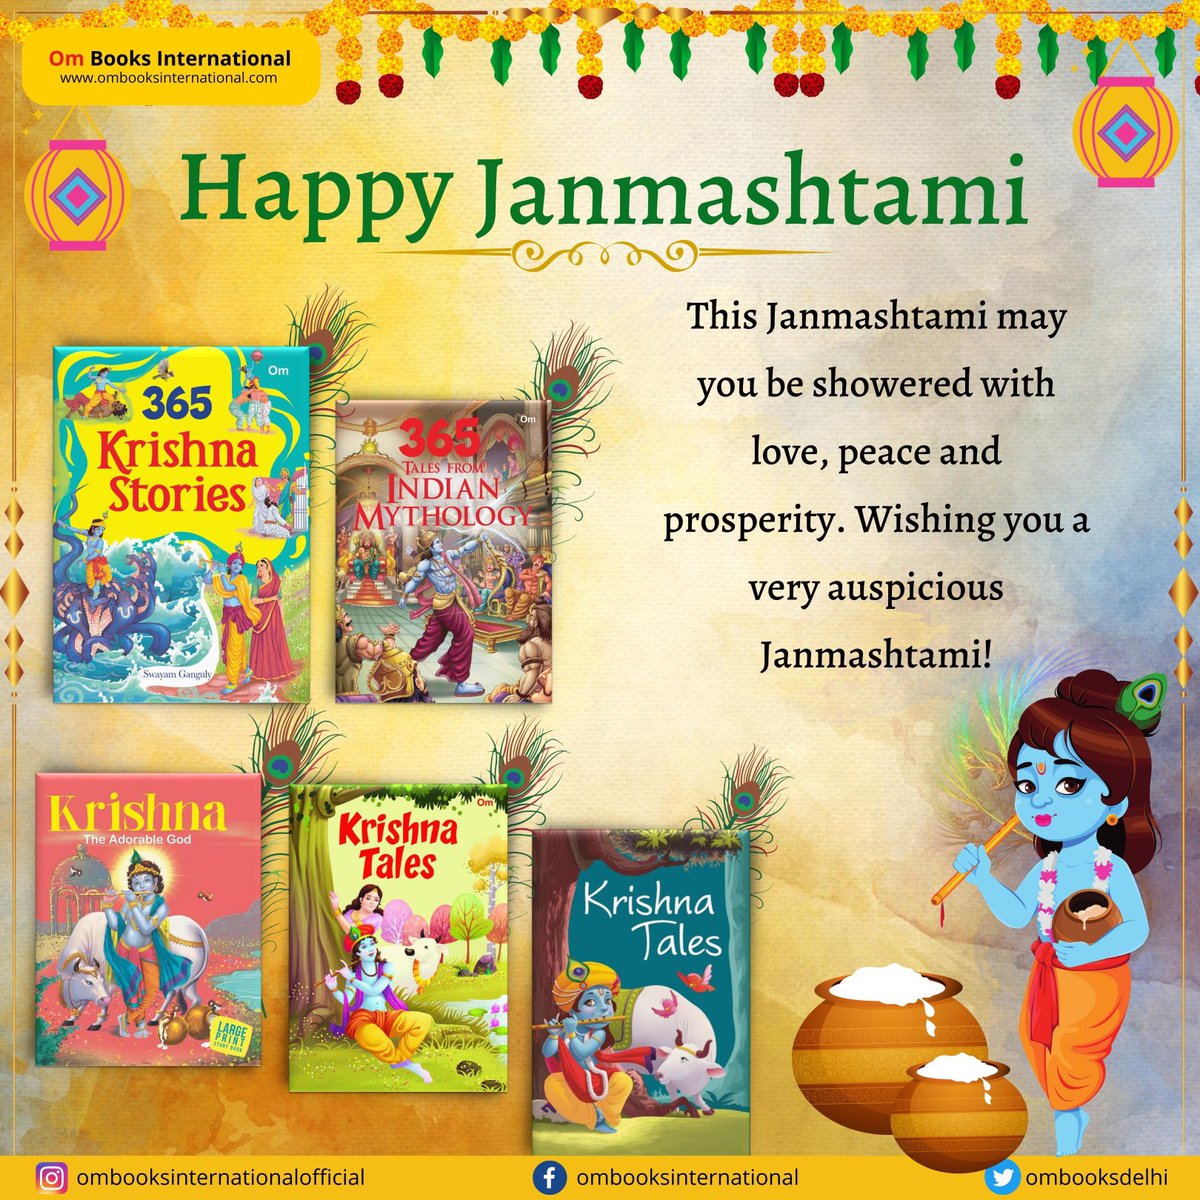 Om Books International Wishes you a Very Happy #Janmashtami May the music of love and wealth enter your life through the flute of Lord Krishna. I pray that Radha's love would teach us how to love and how to love forever. @ajaymago @shubhavilas #ombookshop #ombooksinternational